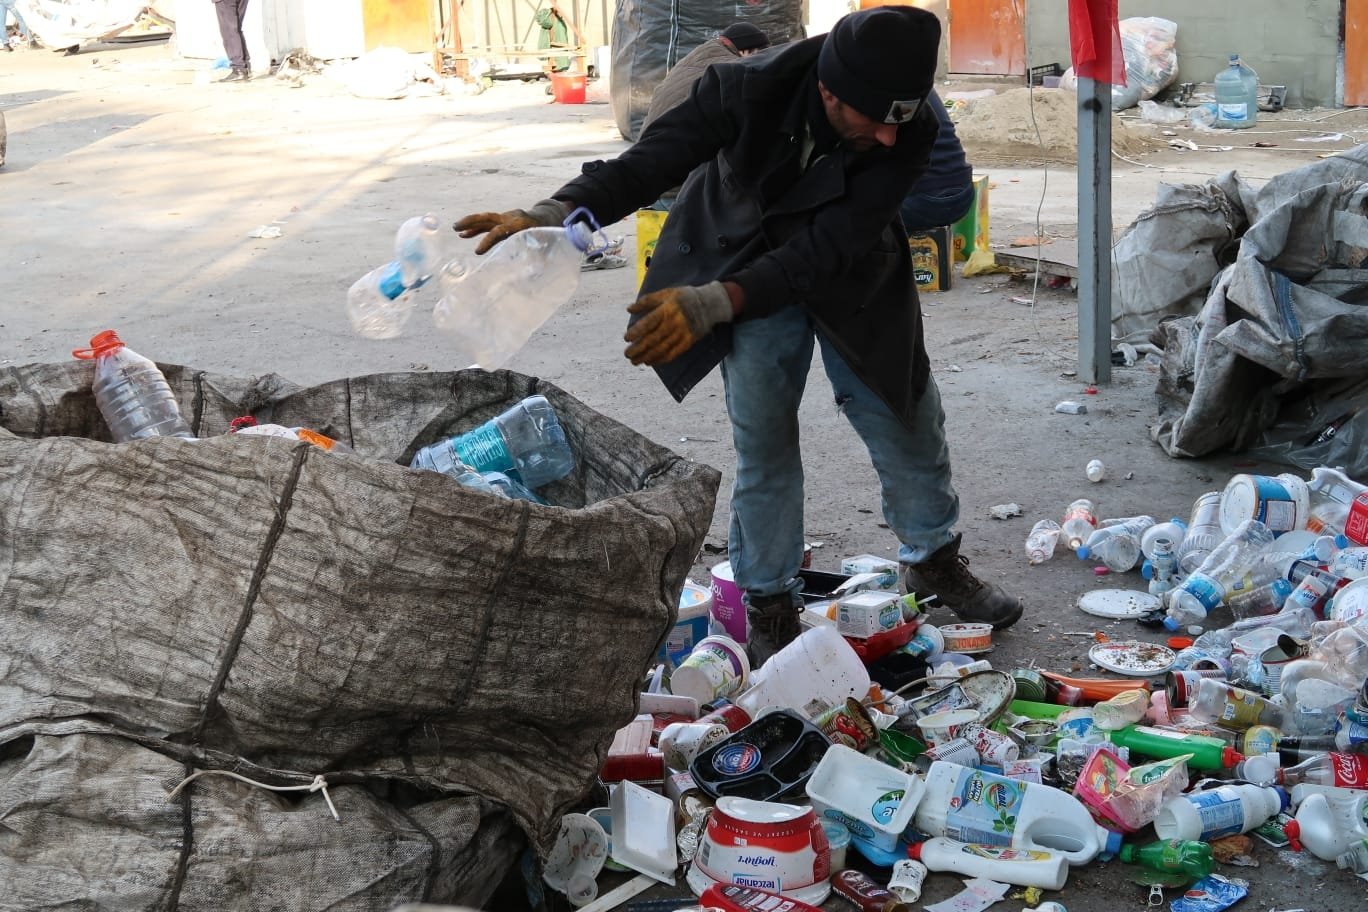 A trash collector sorts the items he collected, in Istanbul, Turkey, Jan. 10, 2022. (Photo by Saffet Azak)